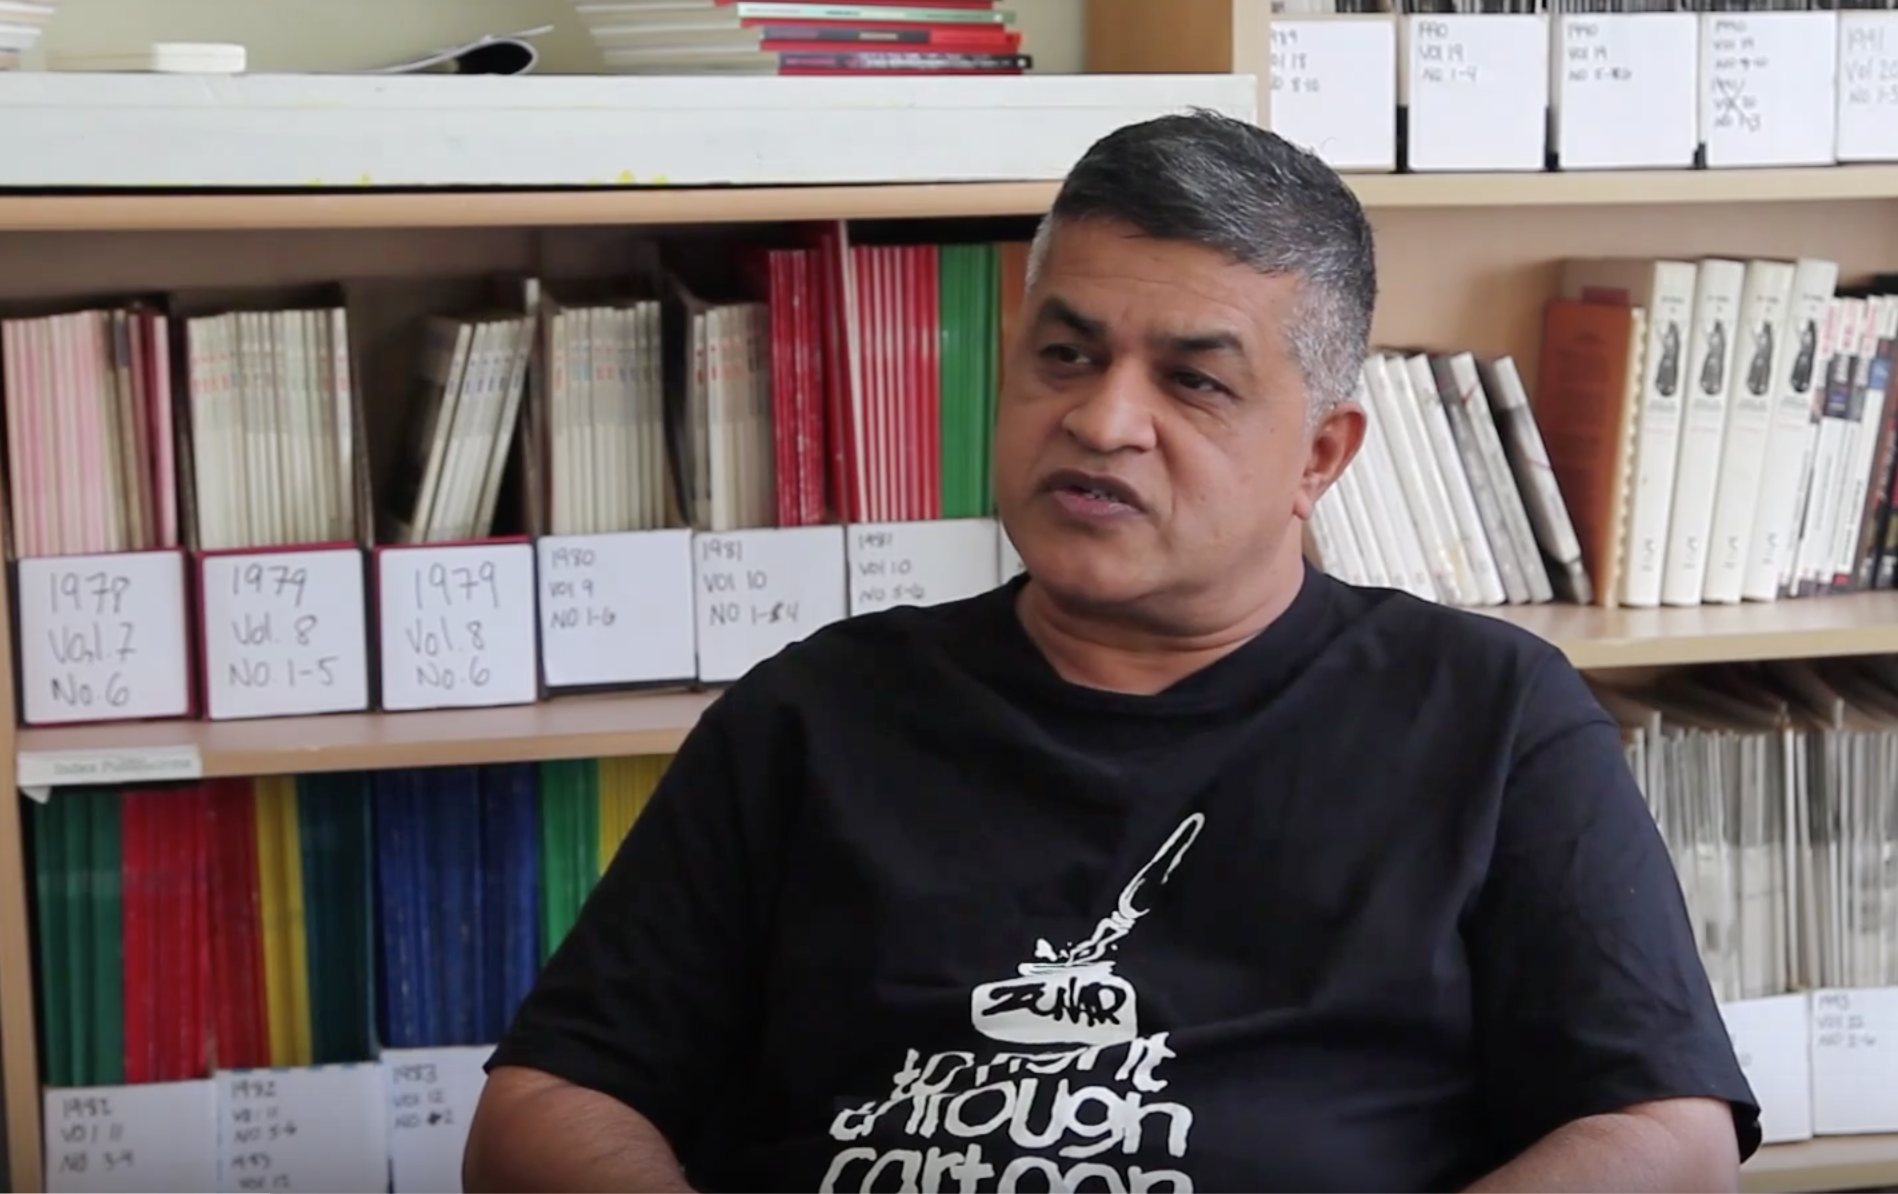 Zunar: “I will never stop. It is my right as a citizen to express my view”